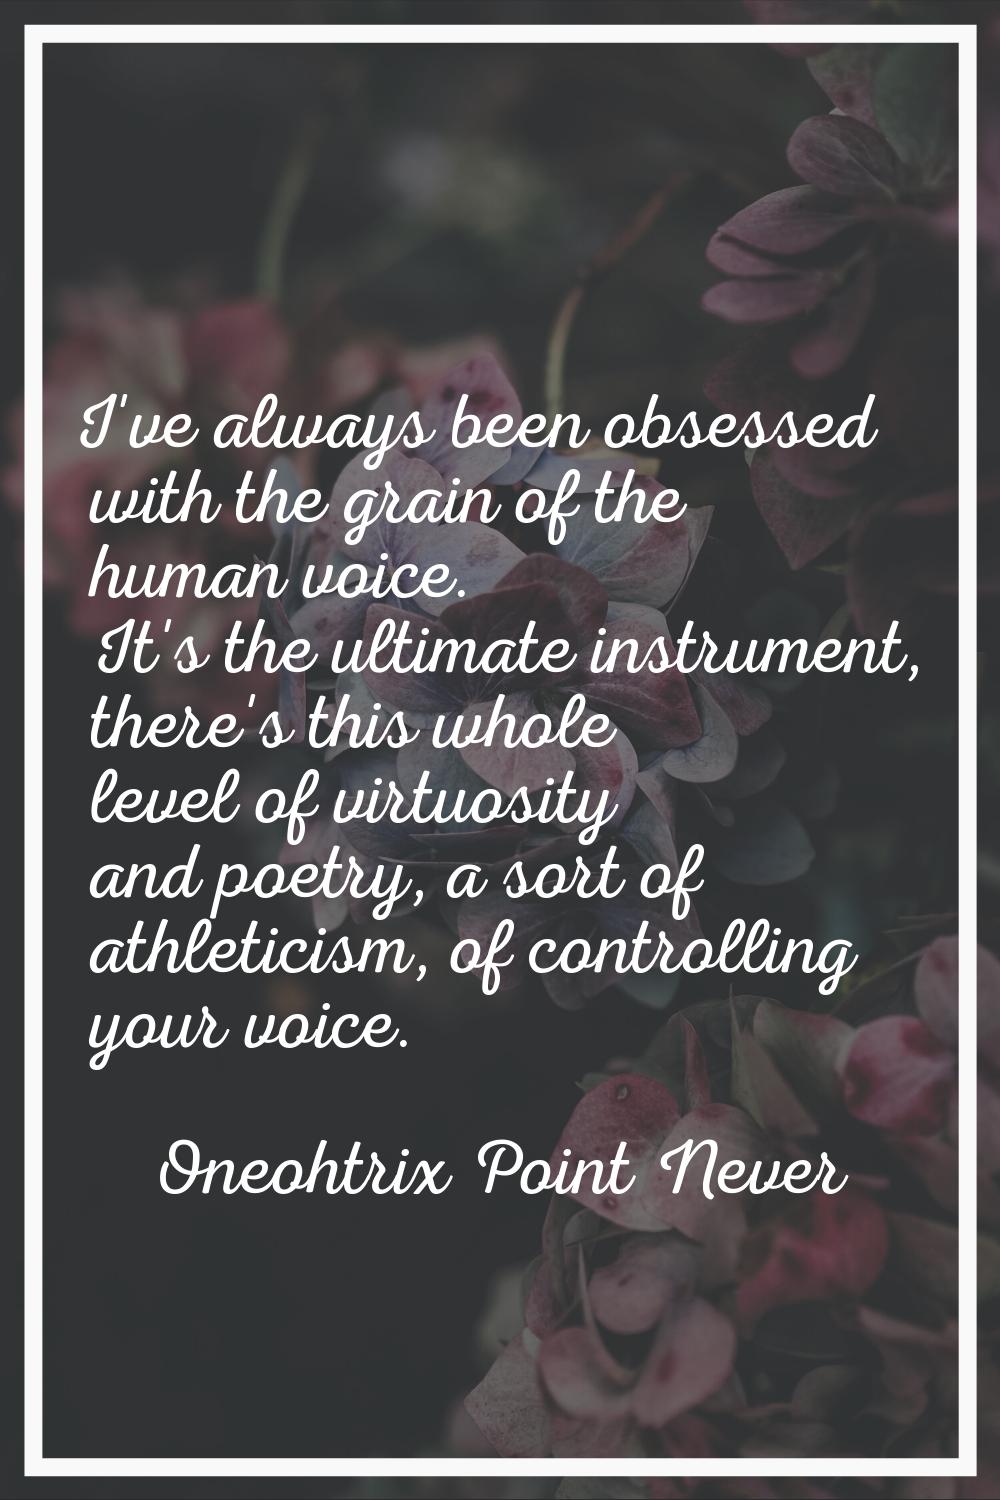 I've always been obsessed with the grain of the human voice. It's the ultimate instrument, there's 